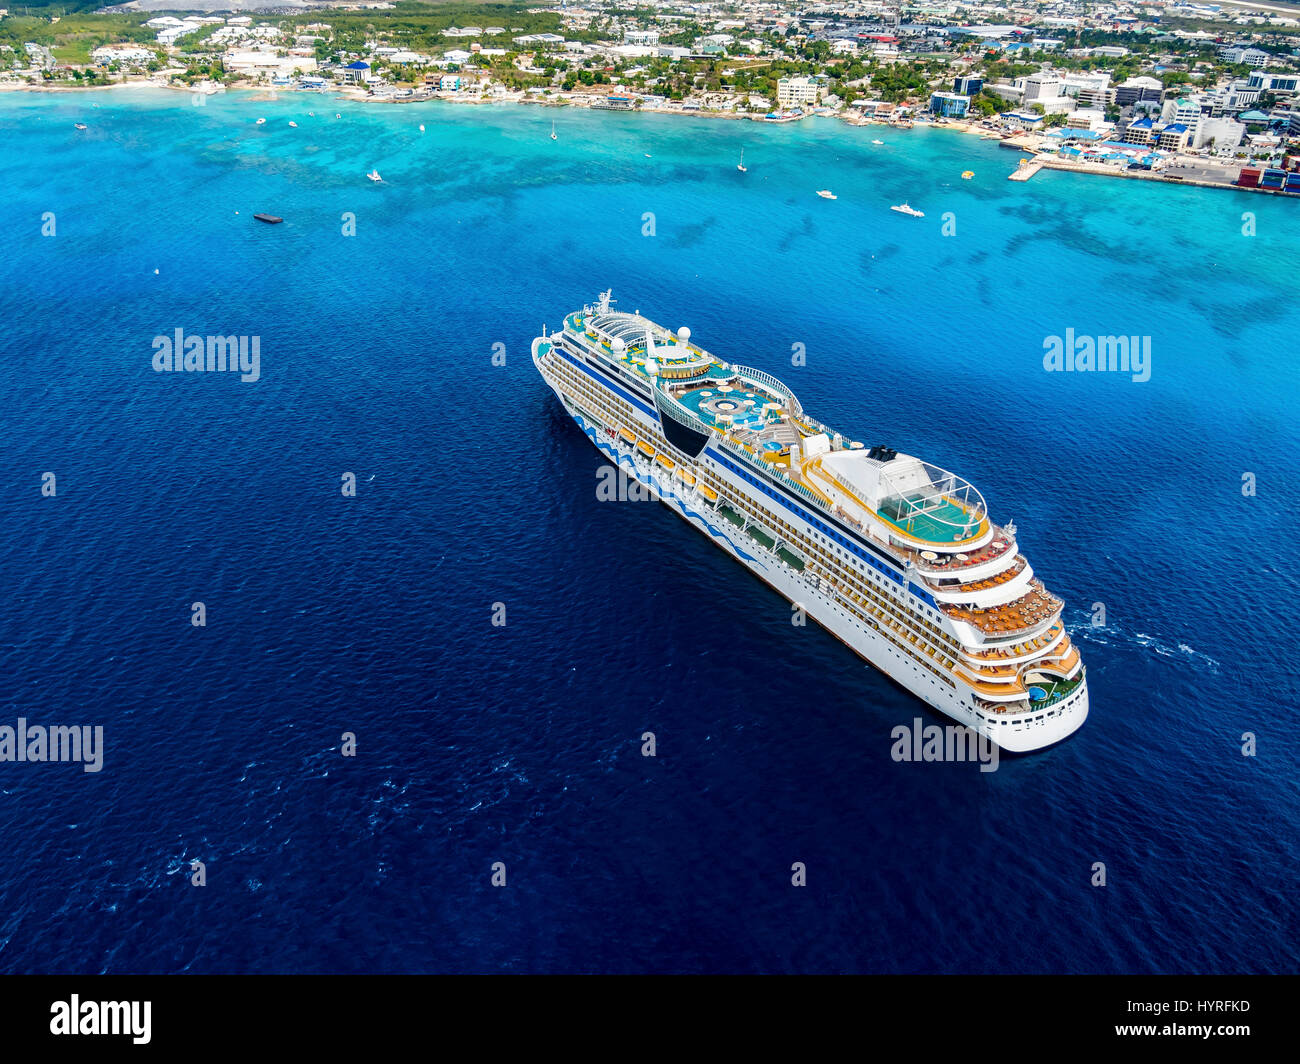 Cruise ship at Georgetown, George Town, Grand Cayman, Caribbean, Cayman Islands Stock Photo